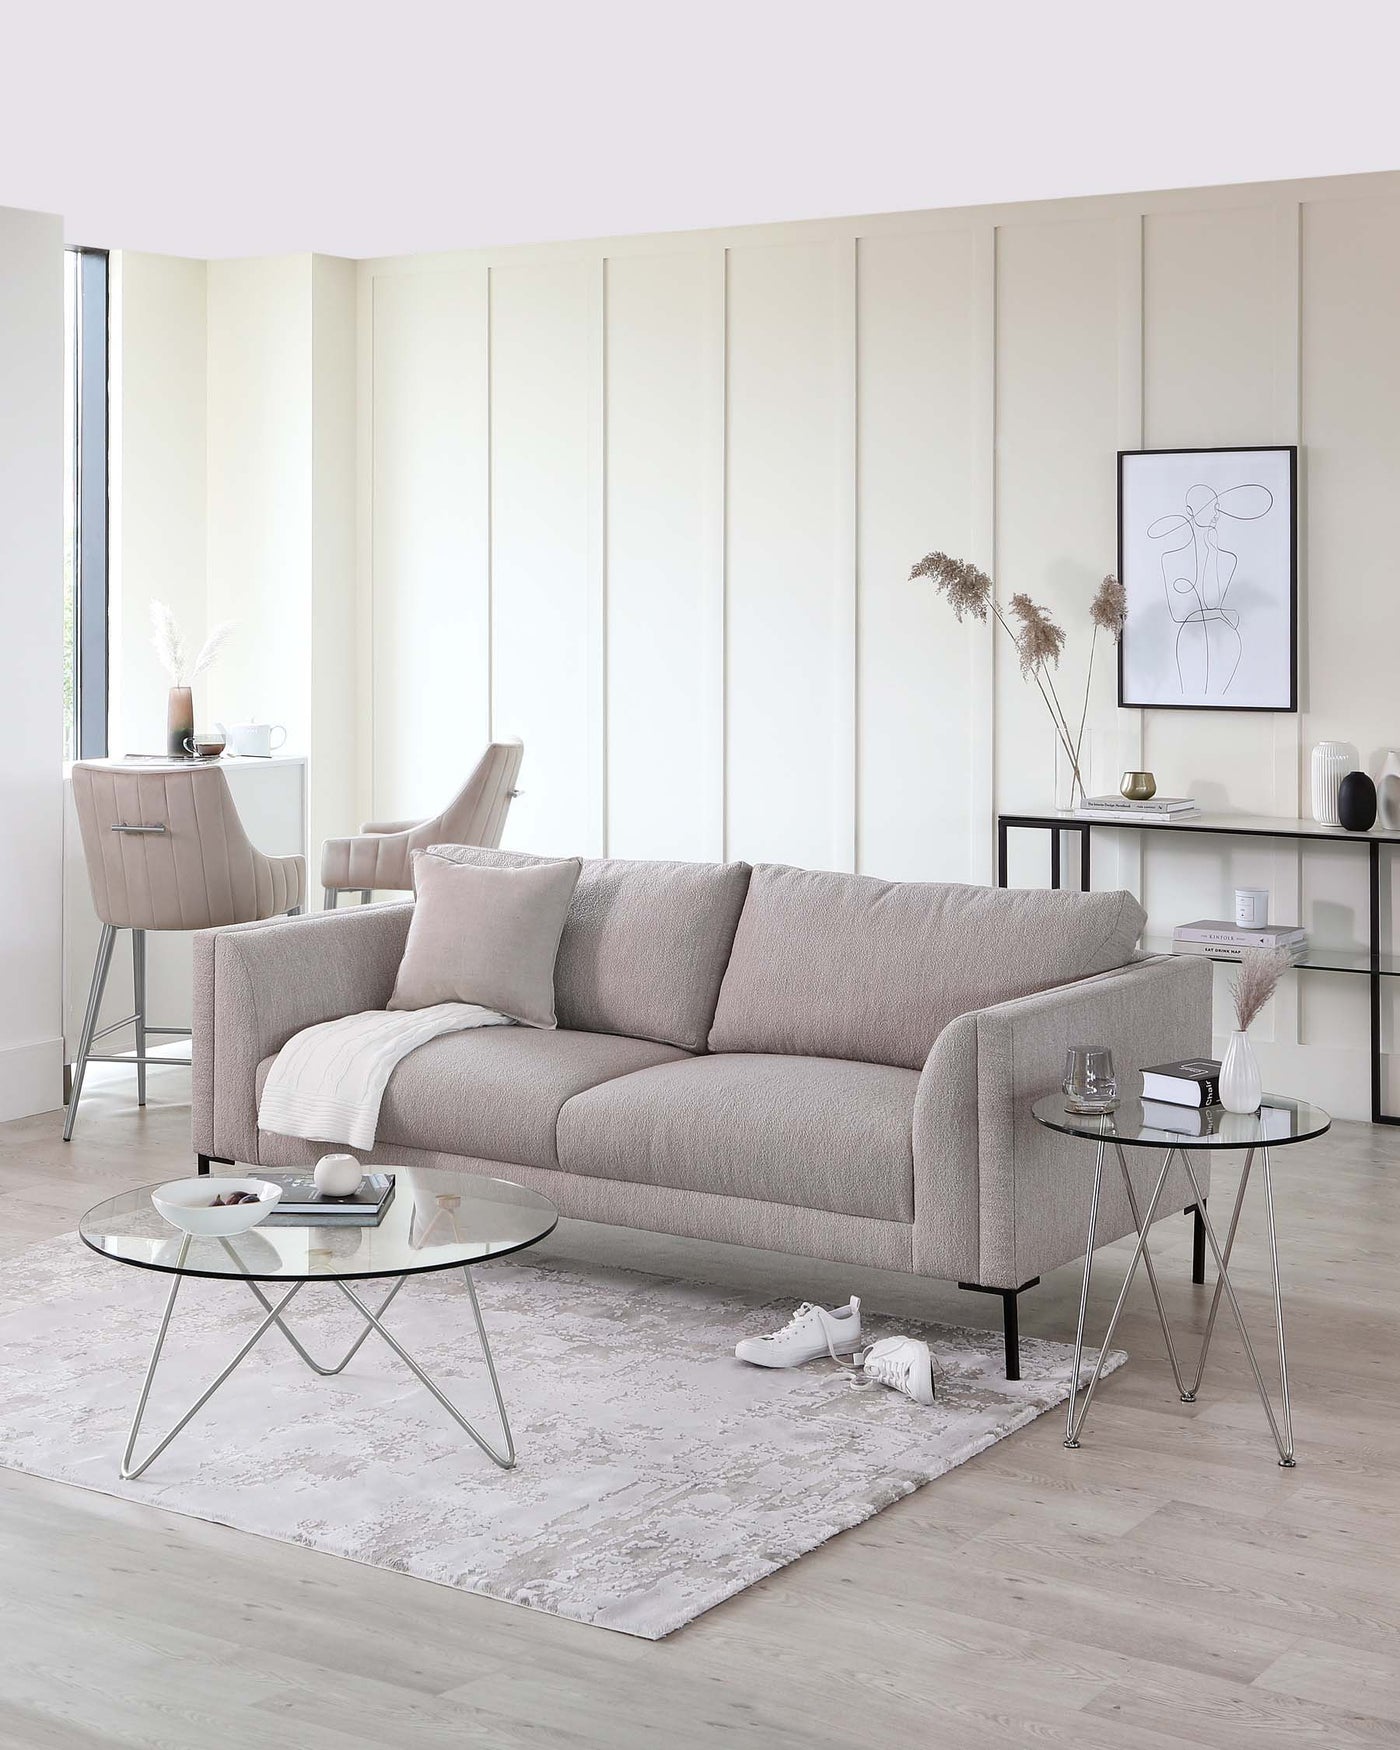 A contemporary living room setting featuring a three-seater fabric sofa in light grey with cushioned backrest and armrests. Accompanying the sofa is a round glass coffee table with a unique x-shaped metal base. Additionally, a matching side table with a glass top and slender metal legs is placed beside the sofa. The area is layered with a textured light grey area rug, adding warmth to the minimalist design.